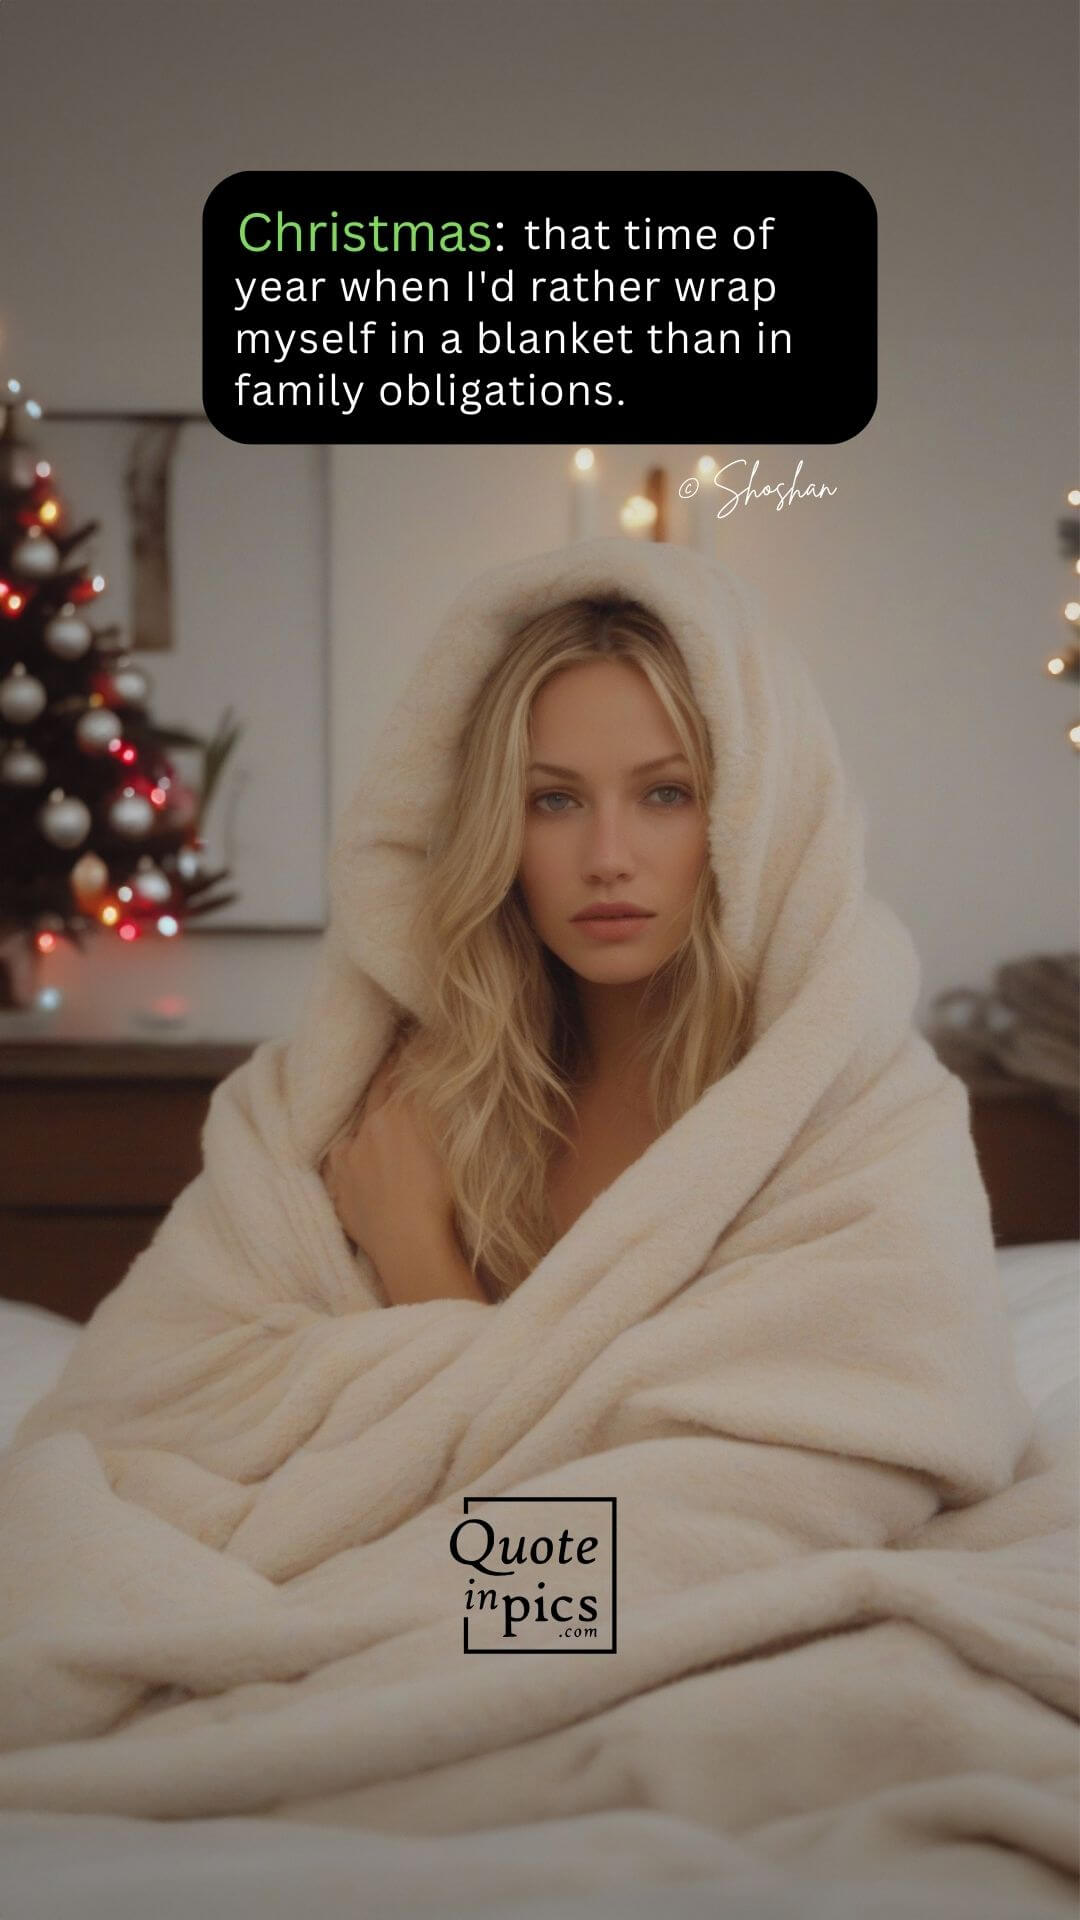 Christmas that time of year when I'd rather wrap myself in a blanket than in family obligations